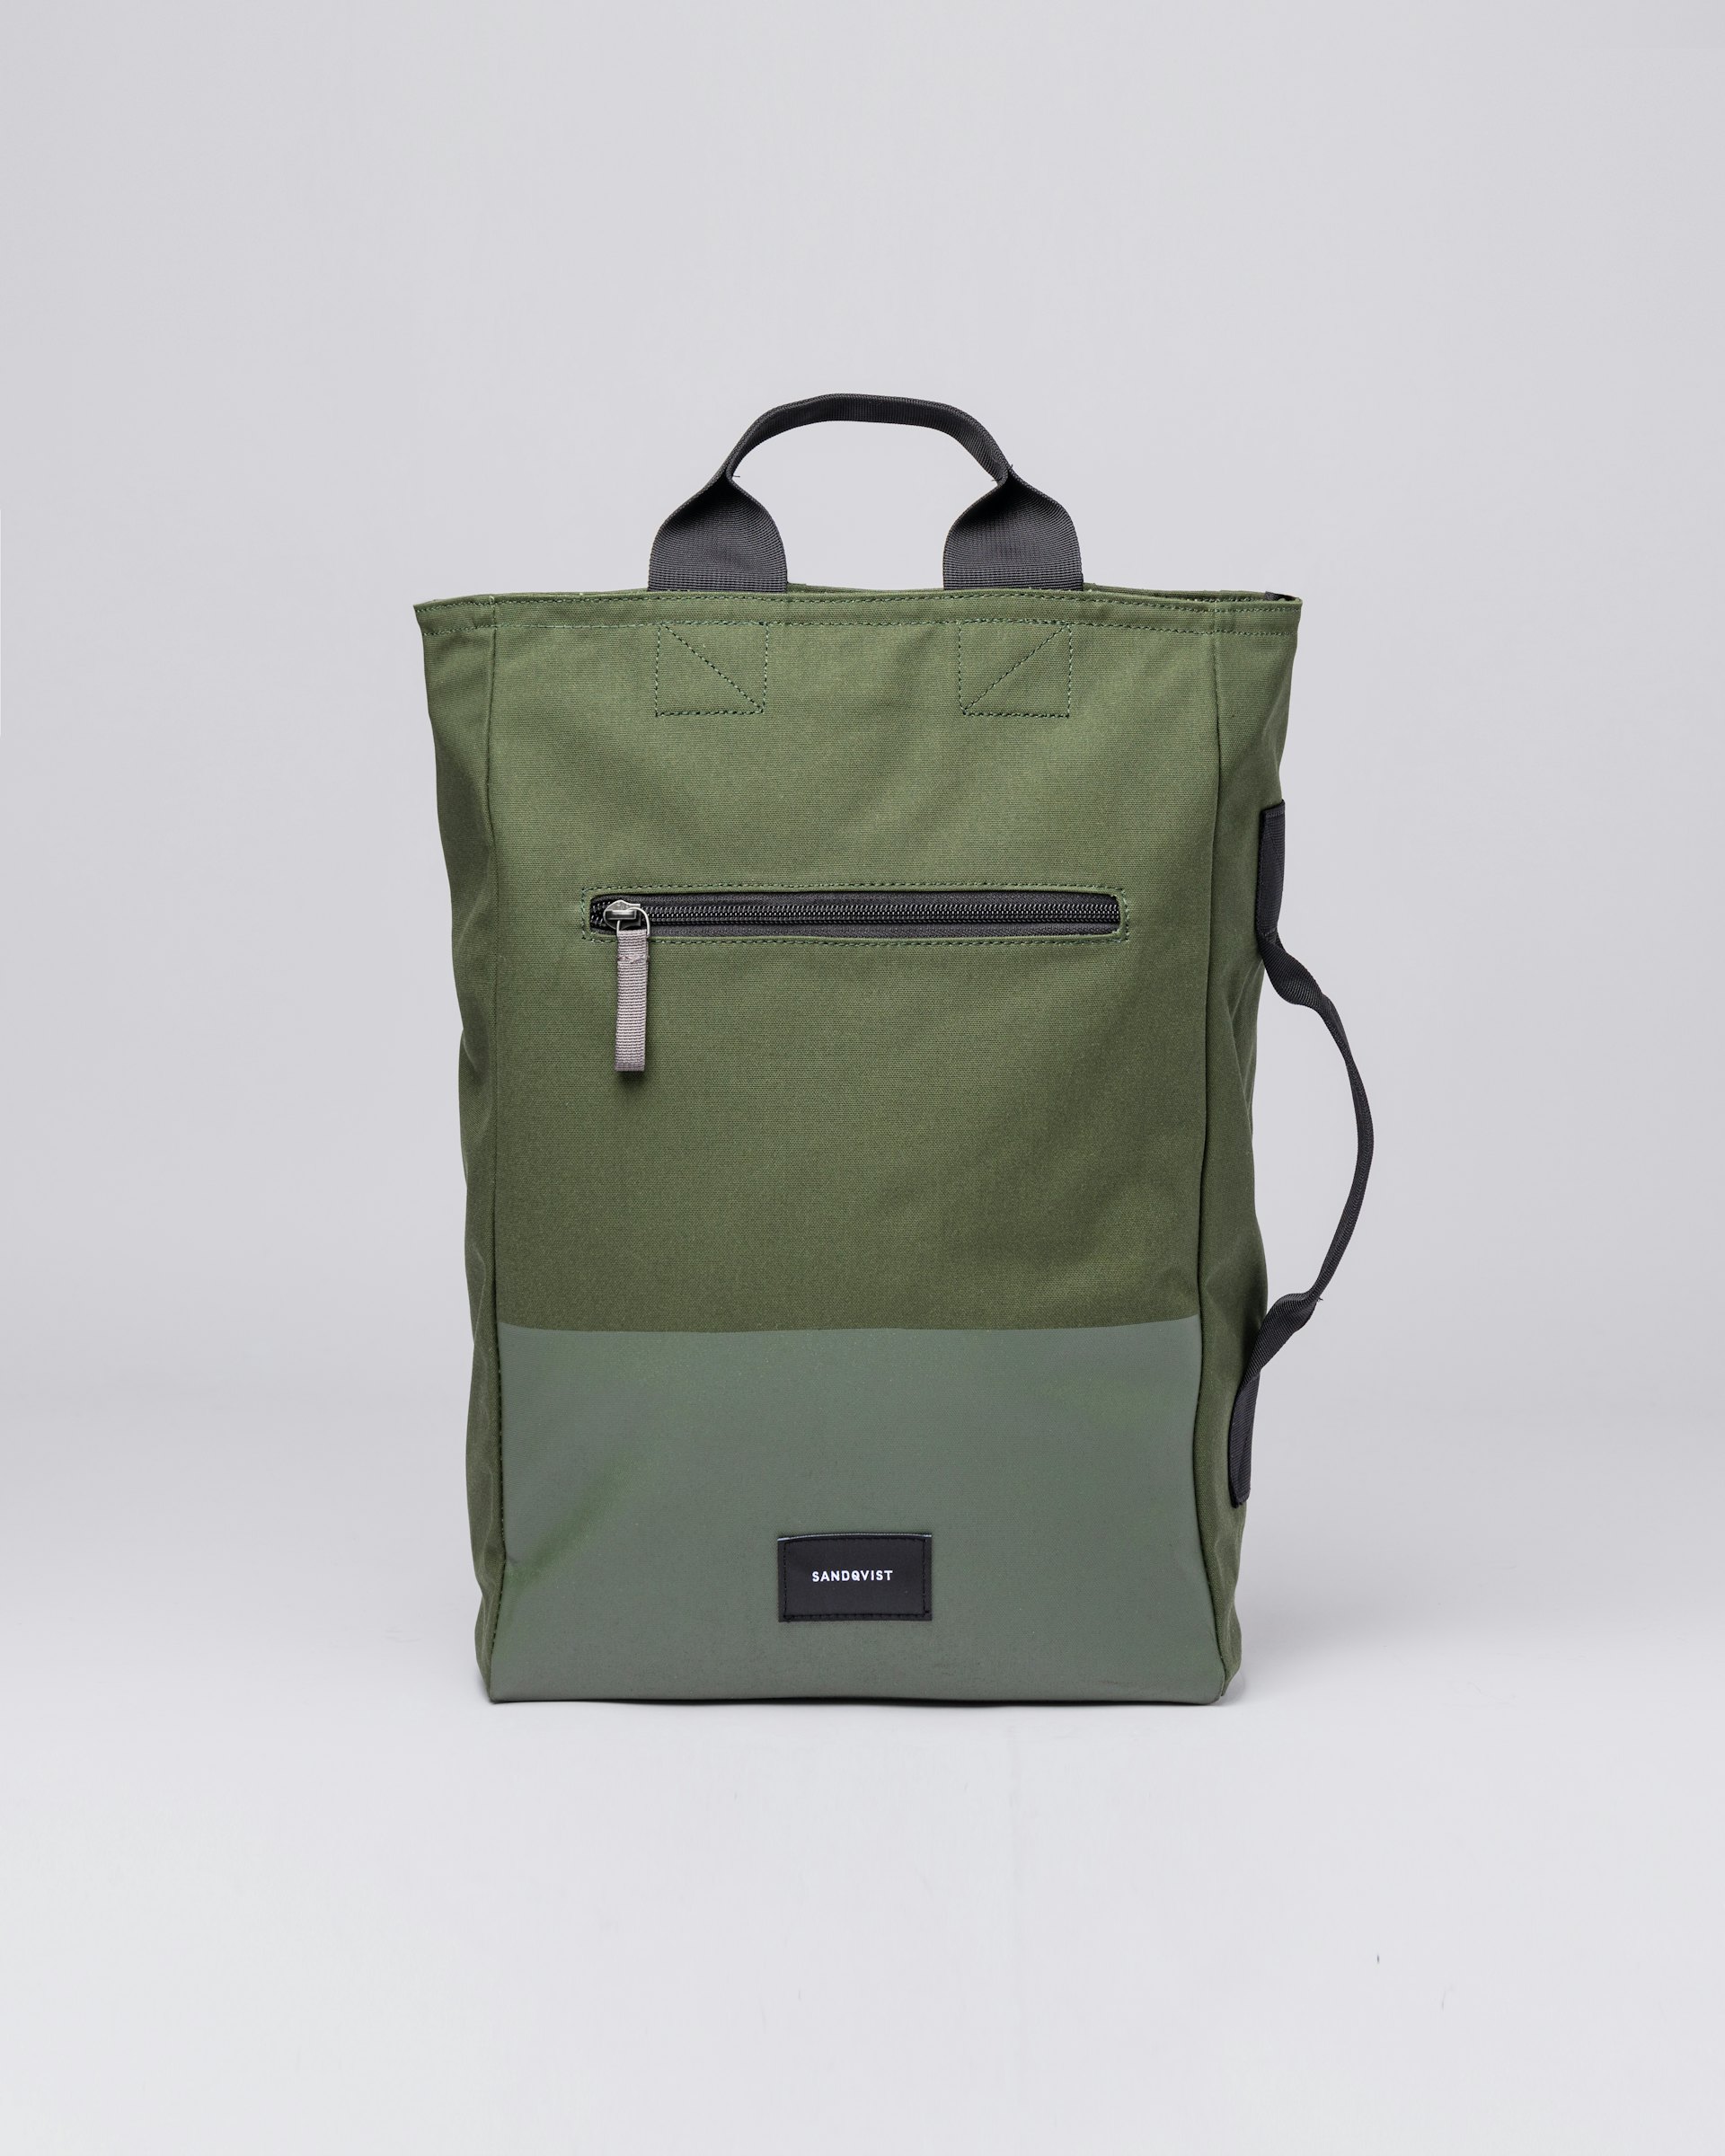 Tony vegan belongs to the category Backpacks and is in color dawn green